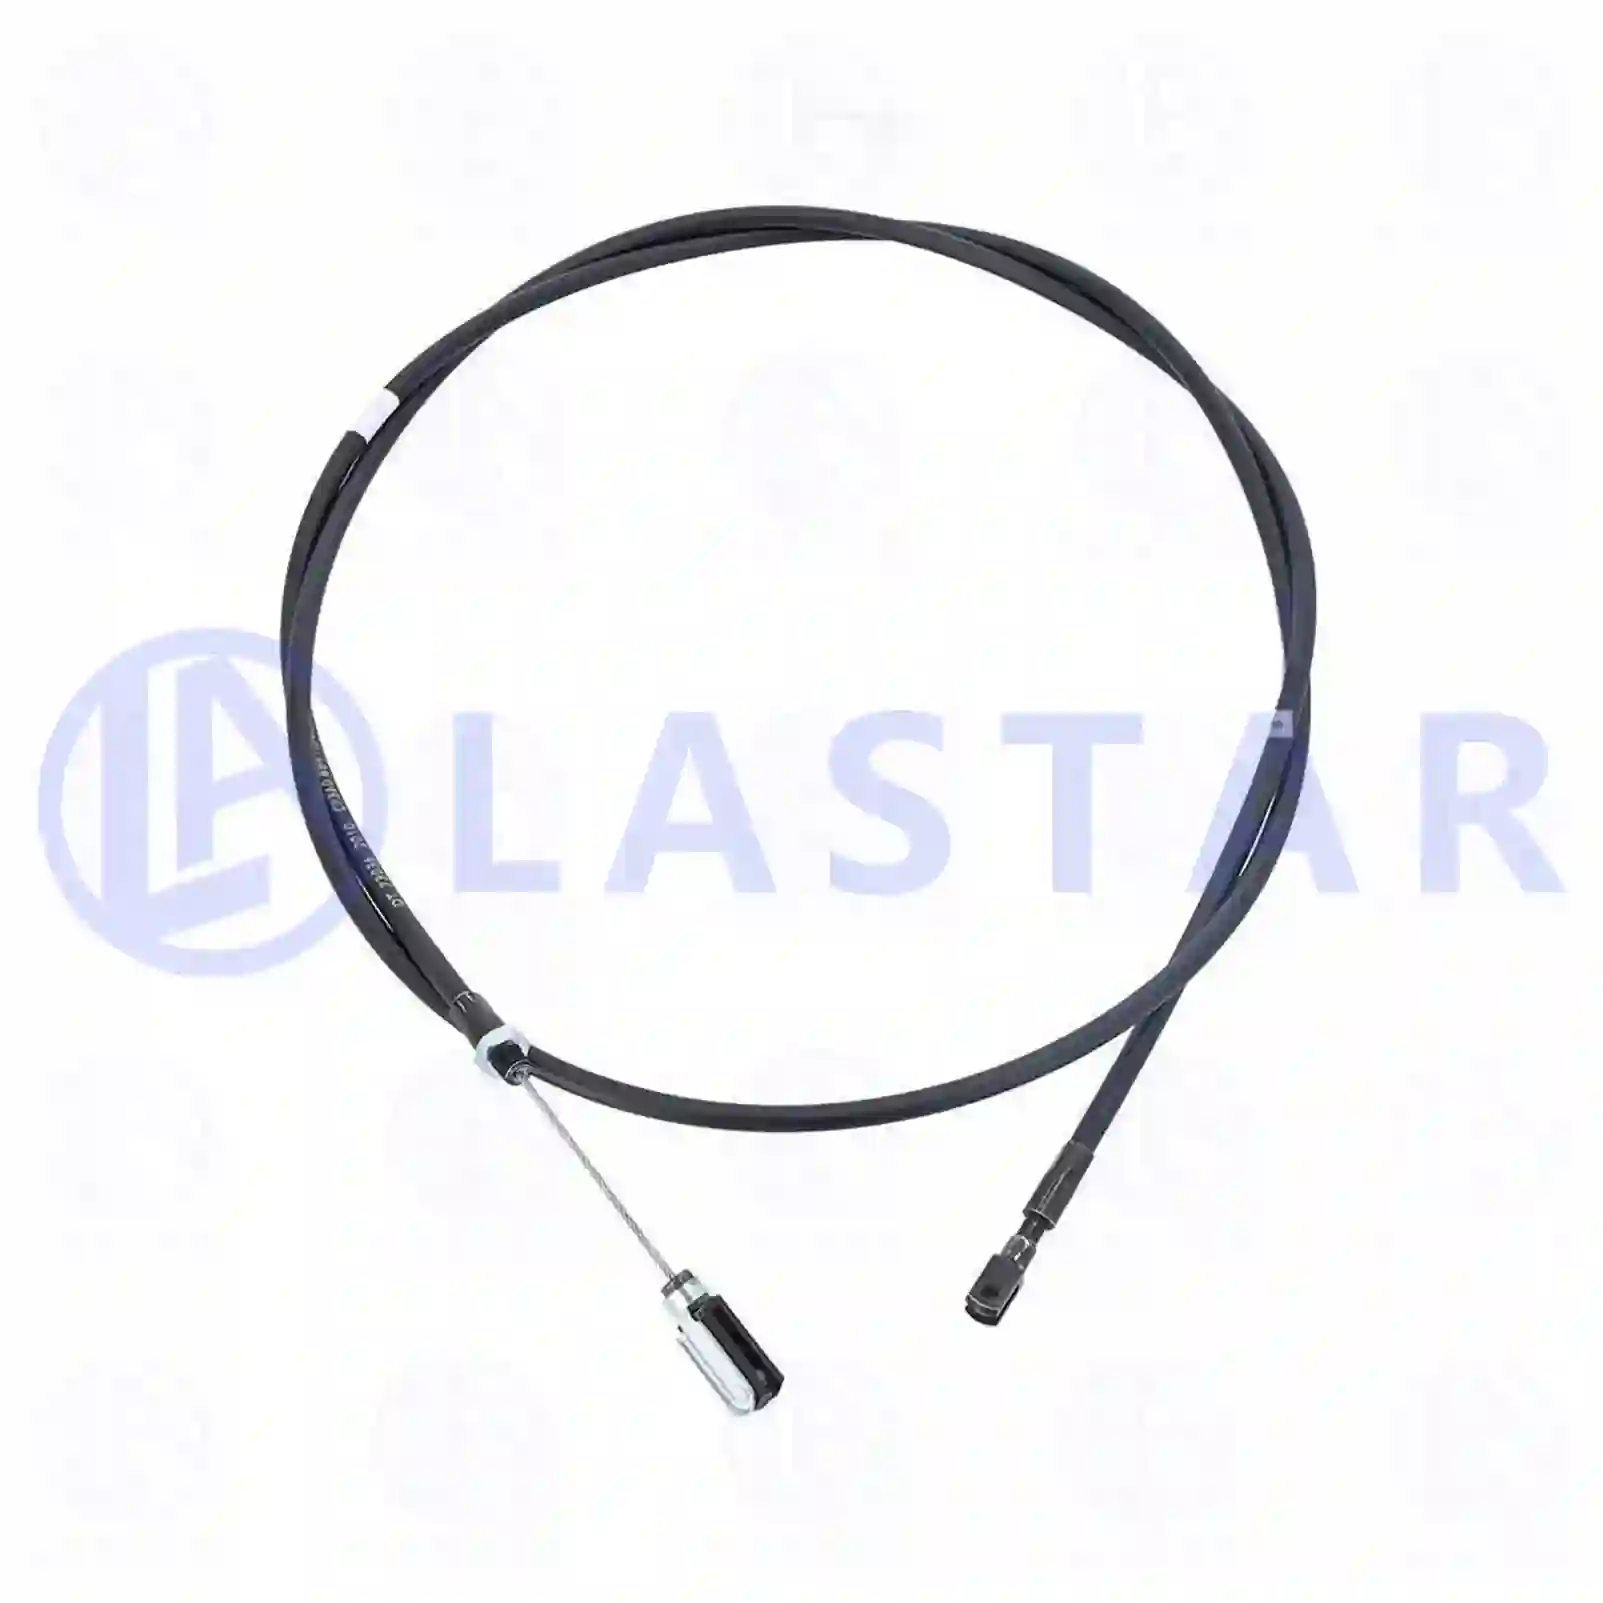 Control wire, front flap, 77721497, 1384393, ZG60422-0008 ||  77721497 Lastar Spare Part | Truck Spare Parts, Auotomotive Spare Parts Control wire, front flap, 77721497, 1384393, ZG60422-0008 ||  77721497 Lastar Spare Part | Truck Spare Parts, Auotomotive Spare Parts